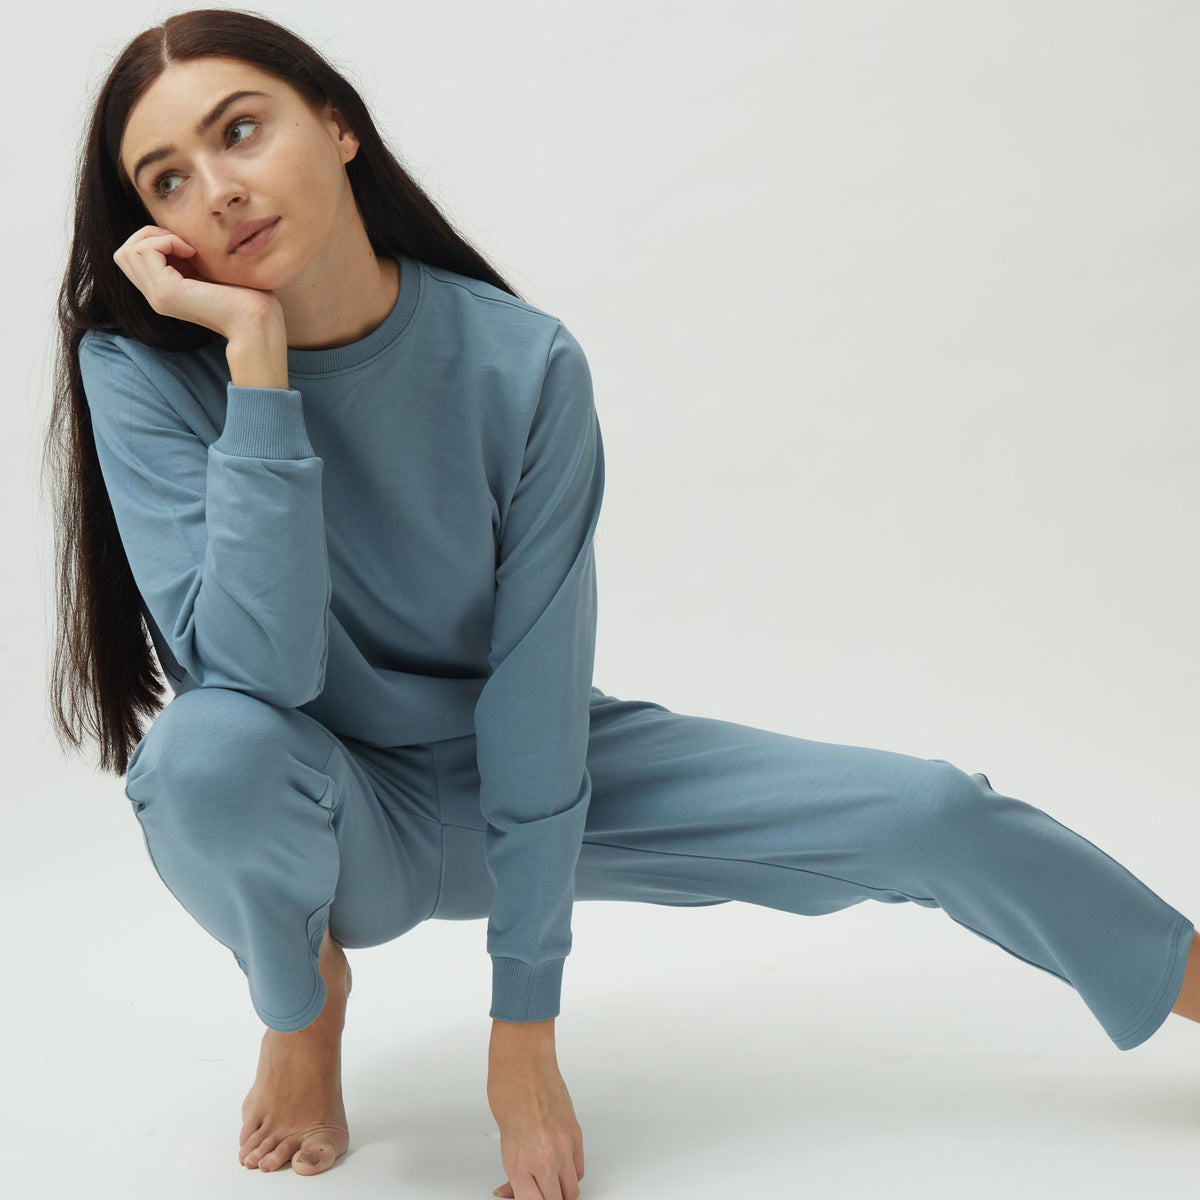 Saltpetre womens wear, lounge wear for casual wear.
  Comfortable jogger & sweatshirt co ord set in blue colour. Made from 100% organic cotton.